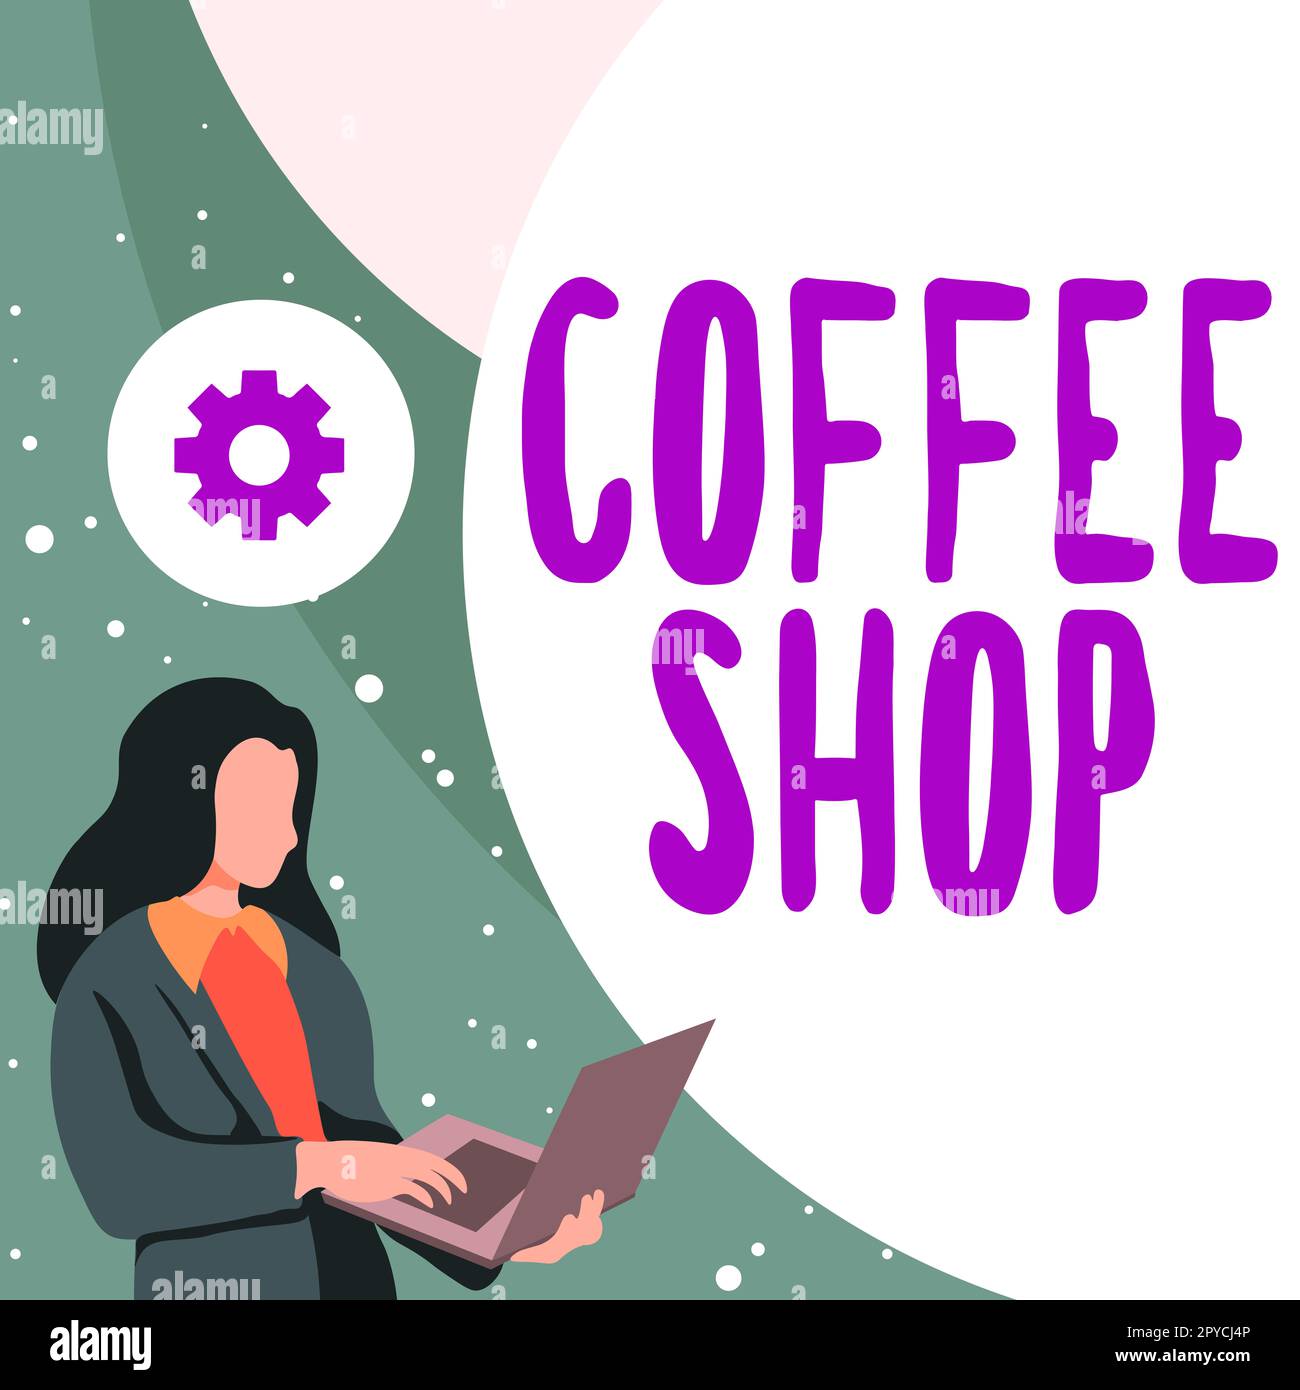 Writing displaying text Coffee Shop. Business idea small informal restaurant serving coffee and light refreshments Stock Photo